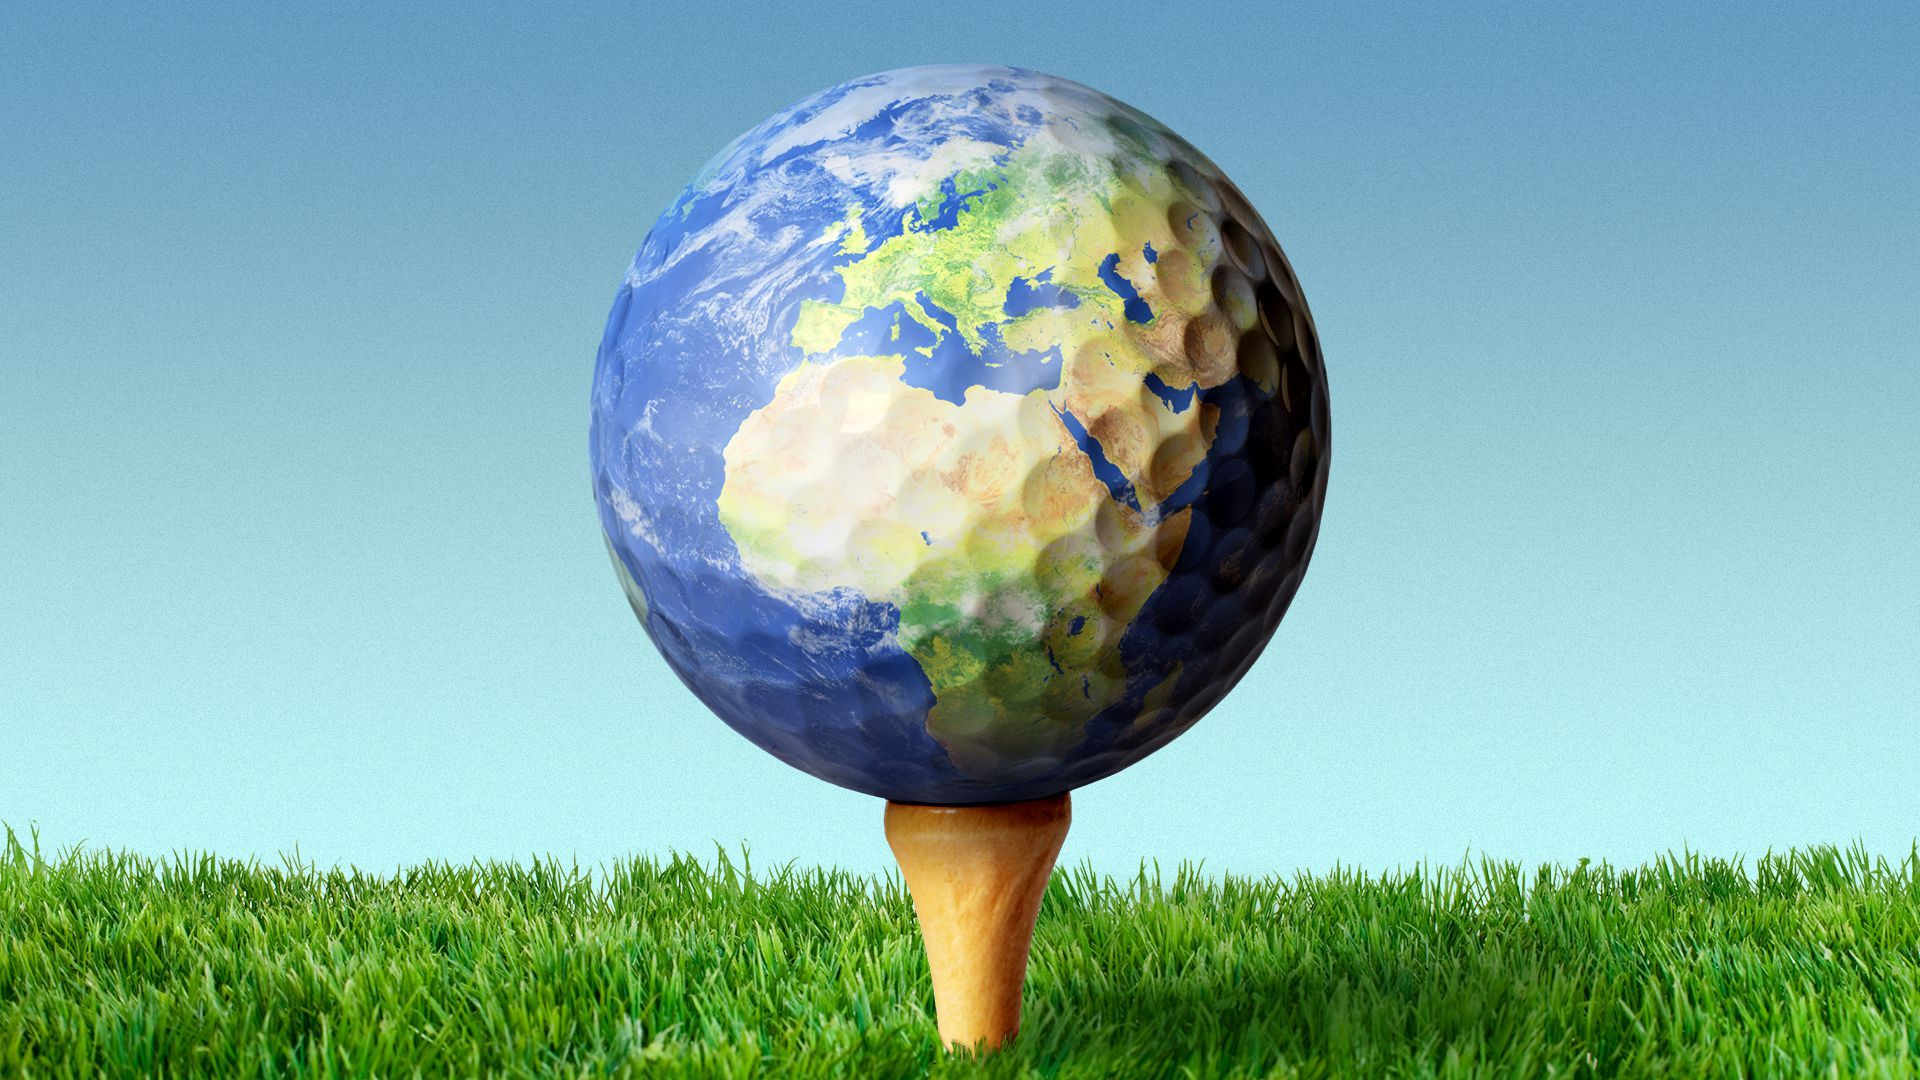 Illustration of the earth as a golf ball, resting on a tee